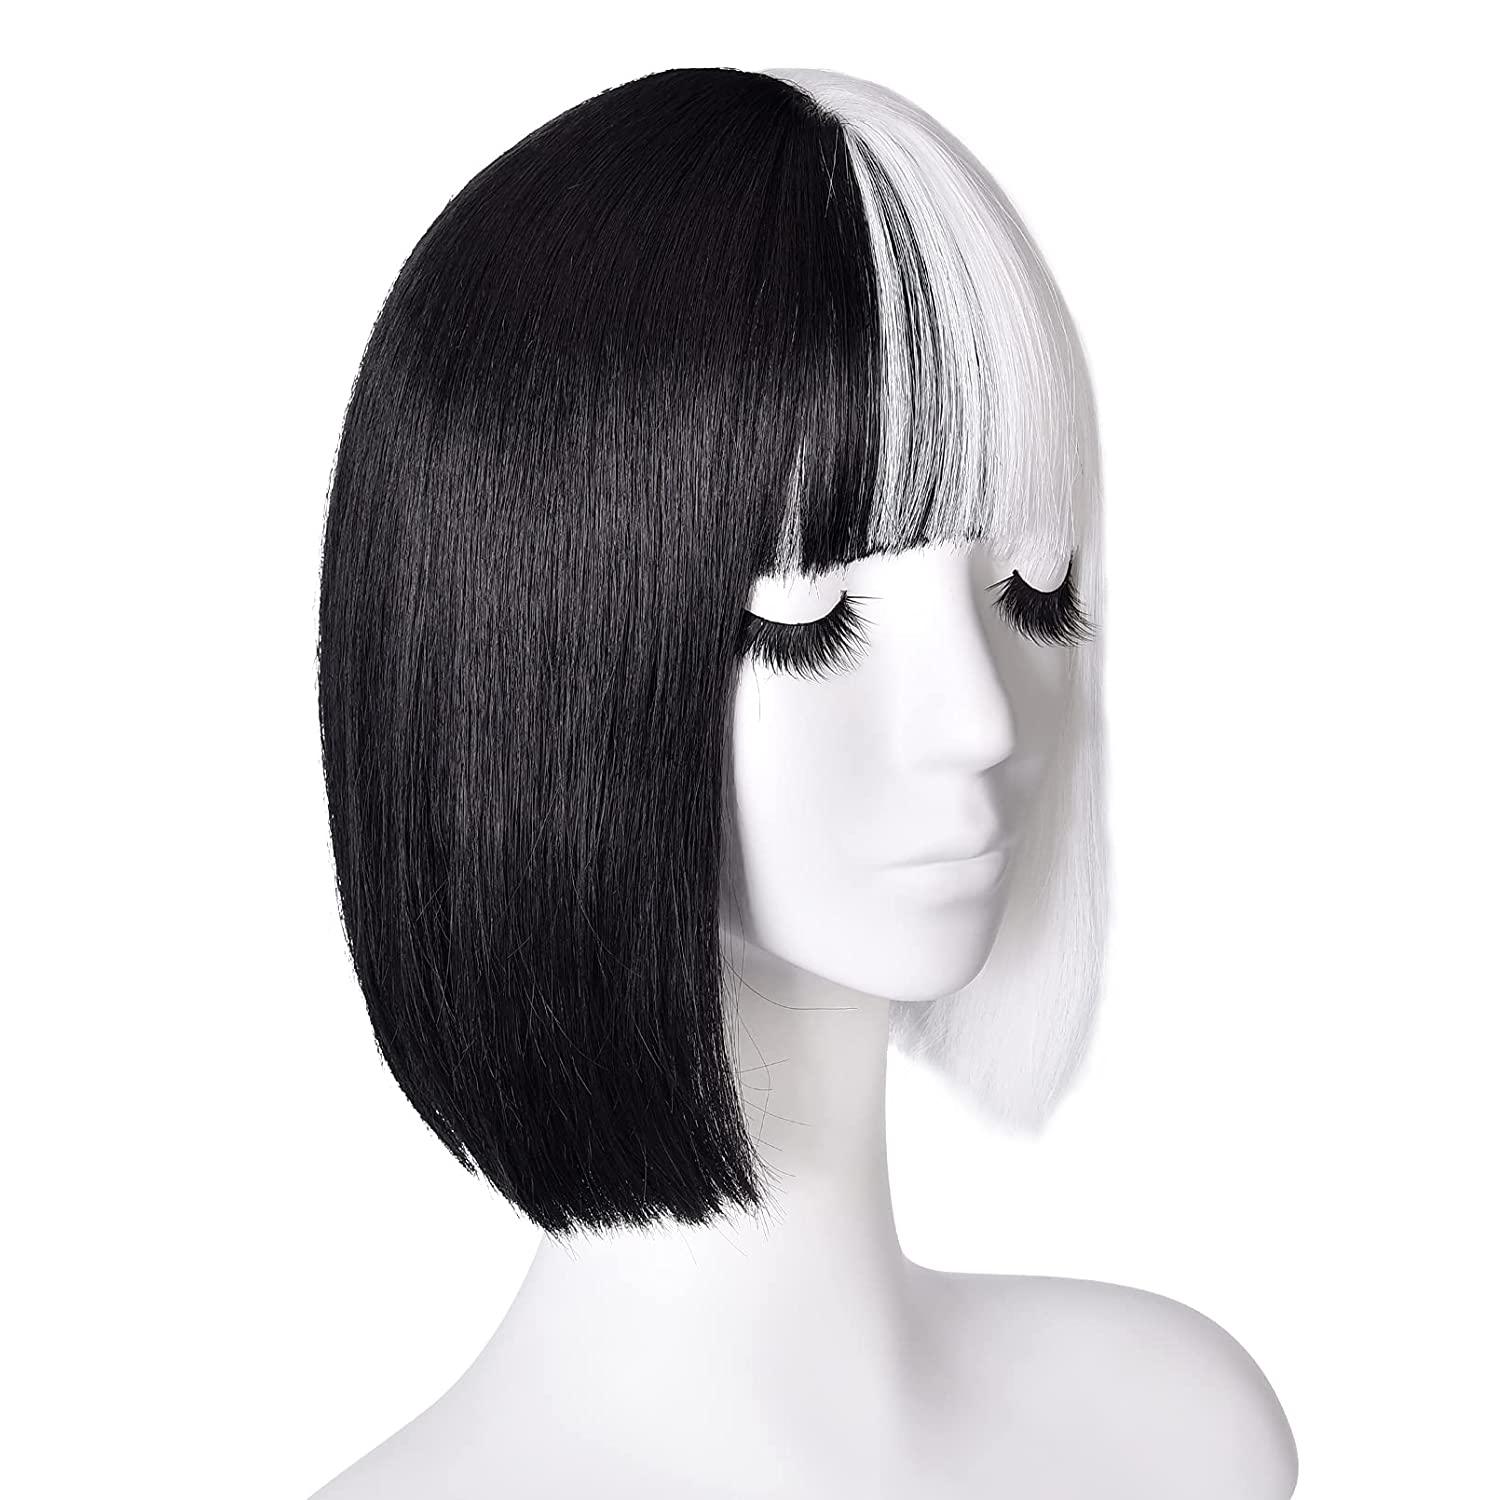 REECHO 11" Short Black and White Cosplay Wig with bangs Synthetic Hair for Women Halloween Costume Cosplay PartyColor: Black White - REECHO Hair